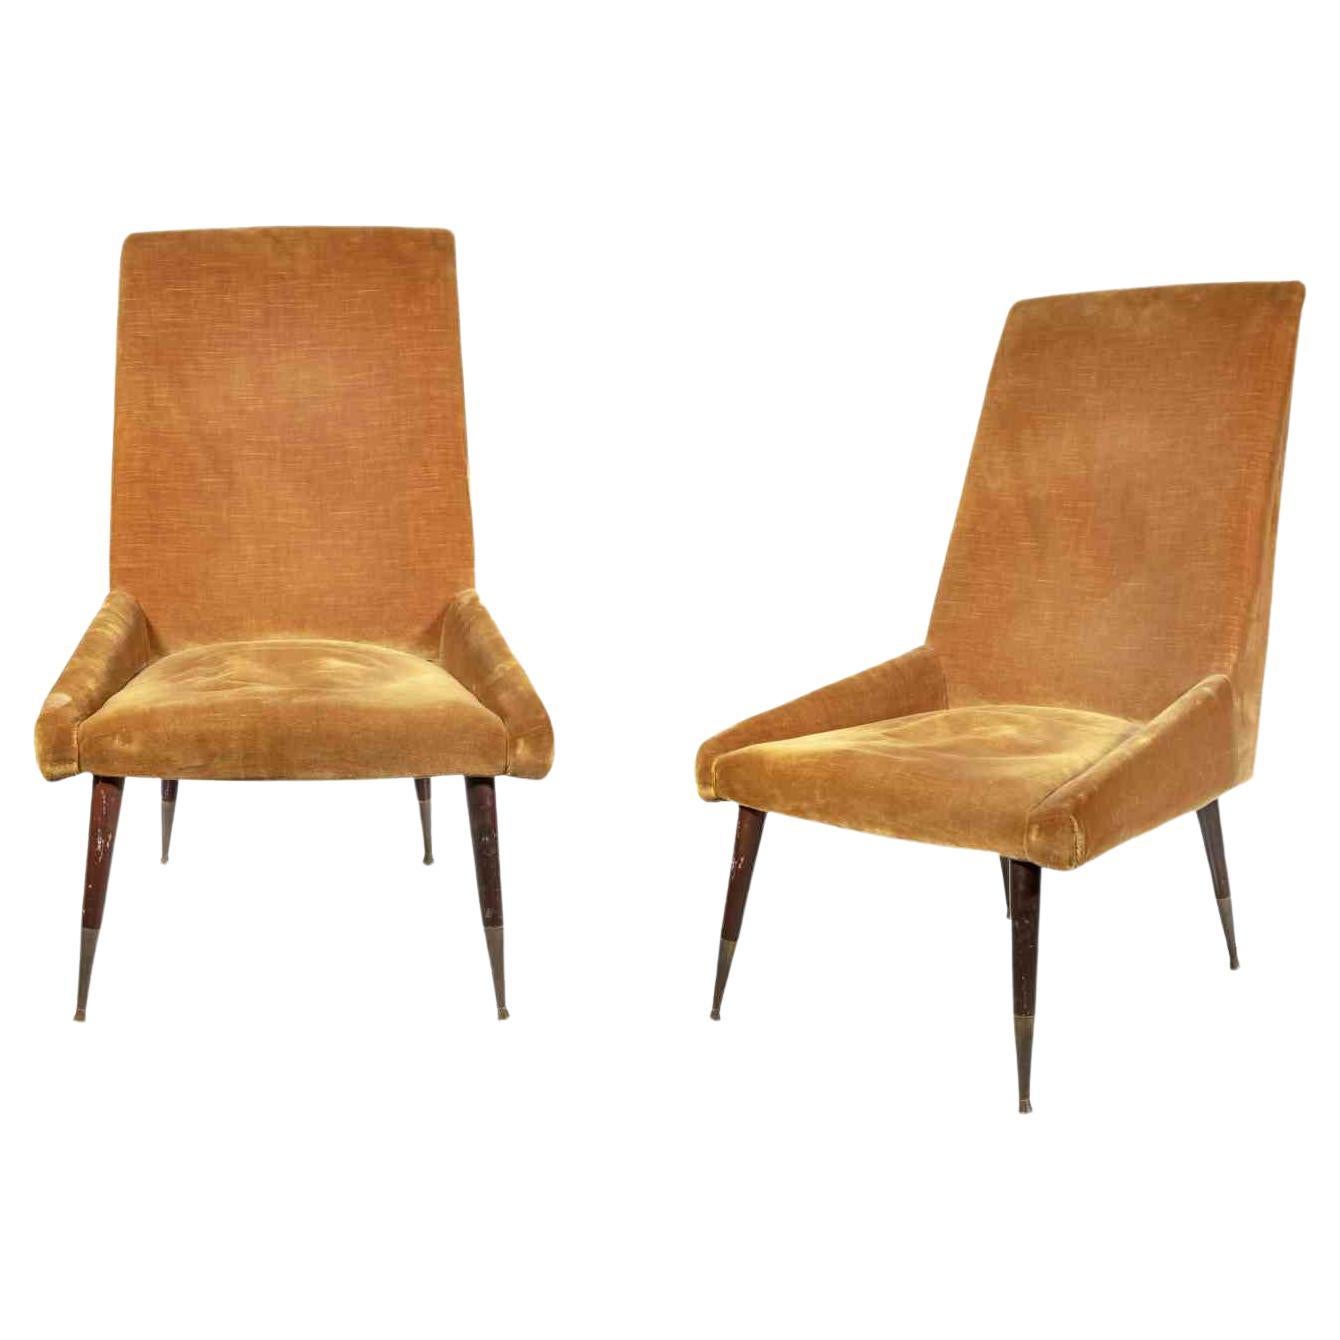 Pair of Vitange Armchairs Italian Production, Mid-20th Century For Sale